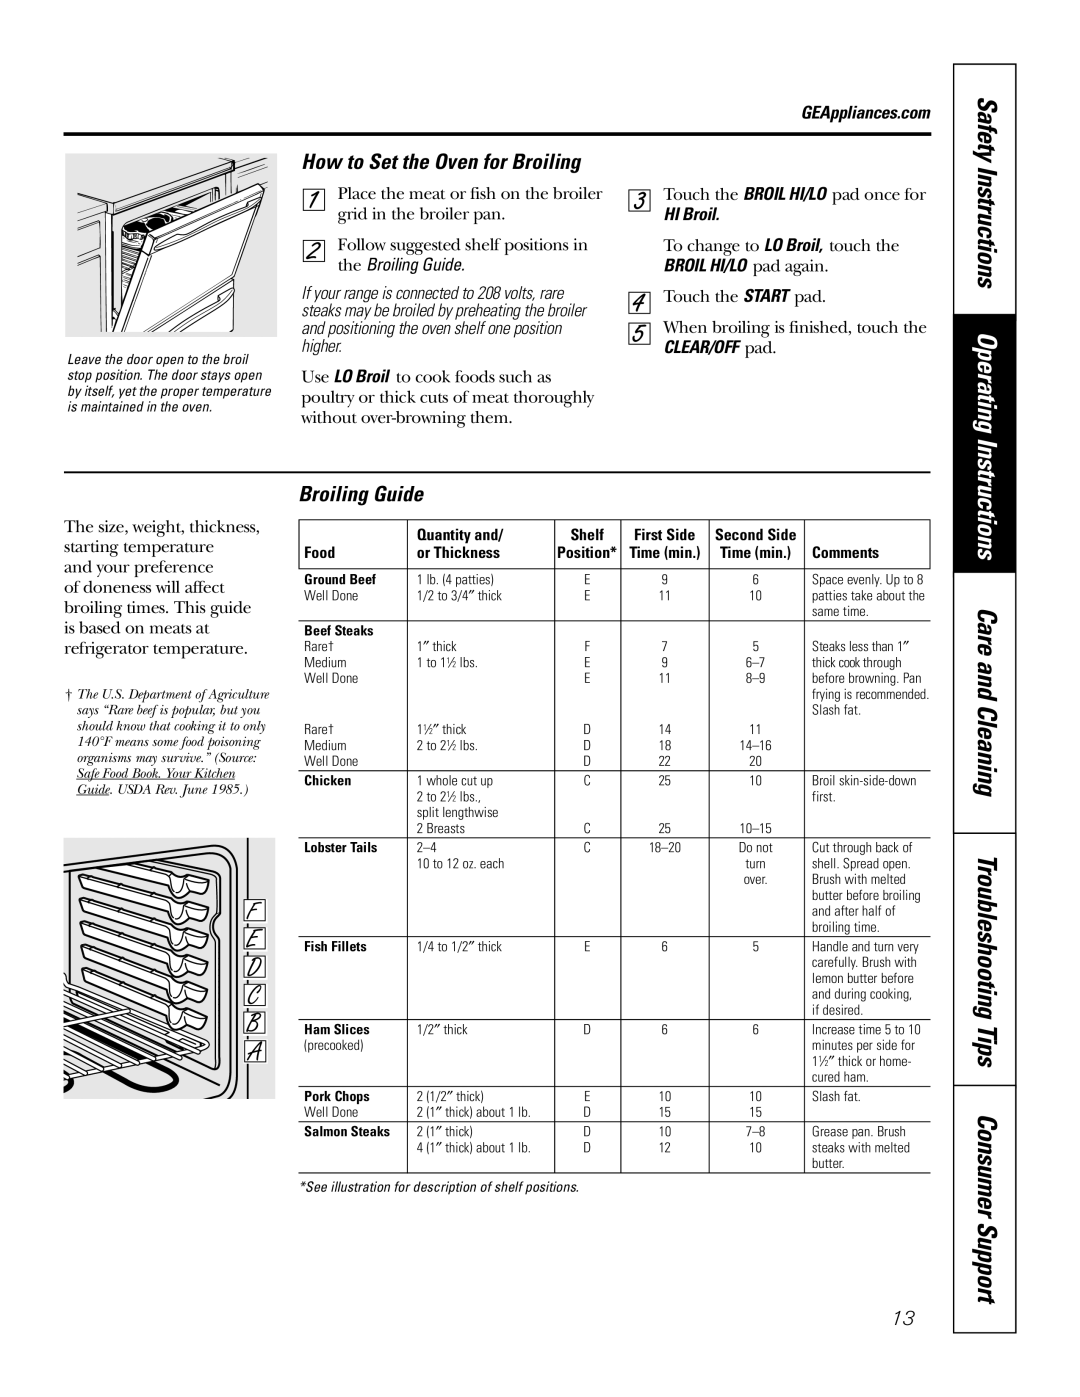 GE JBP84 owner manual Instructions Operating, How to Set the Oven for Broiling, Safety, the Broiling Guide 